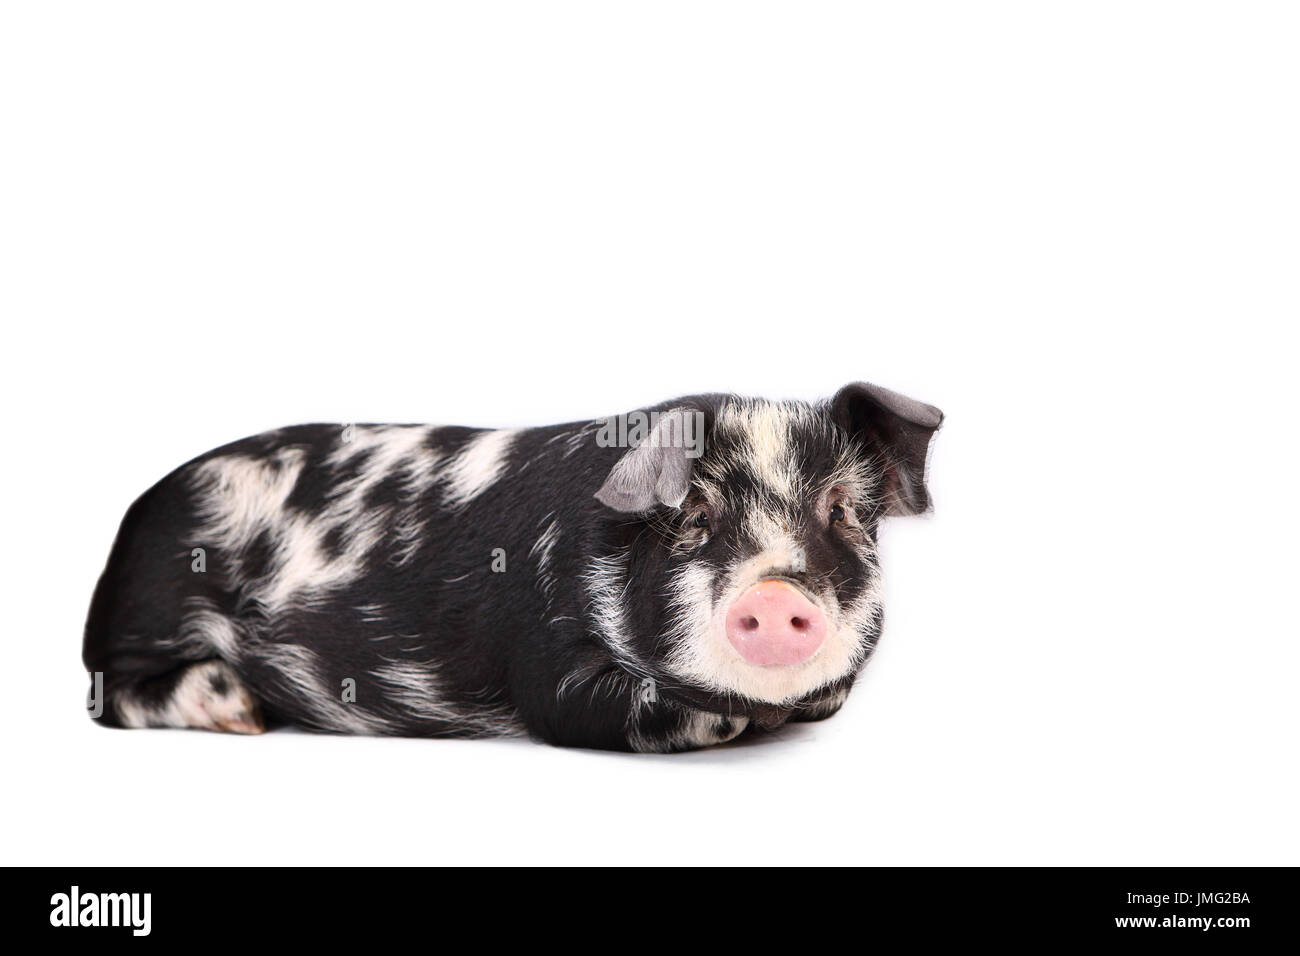 Turopolje Pig. Piglet lying. Studio picture against a white background. Germany Stock Photo